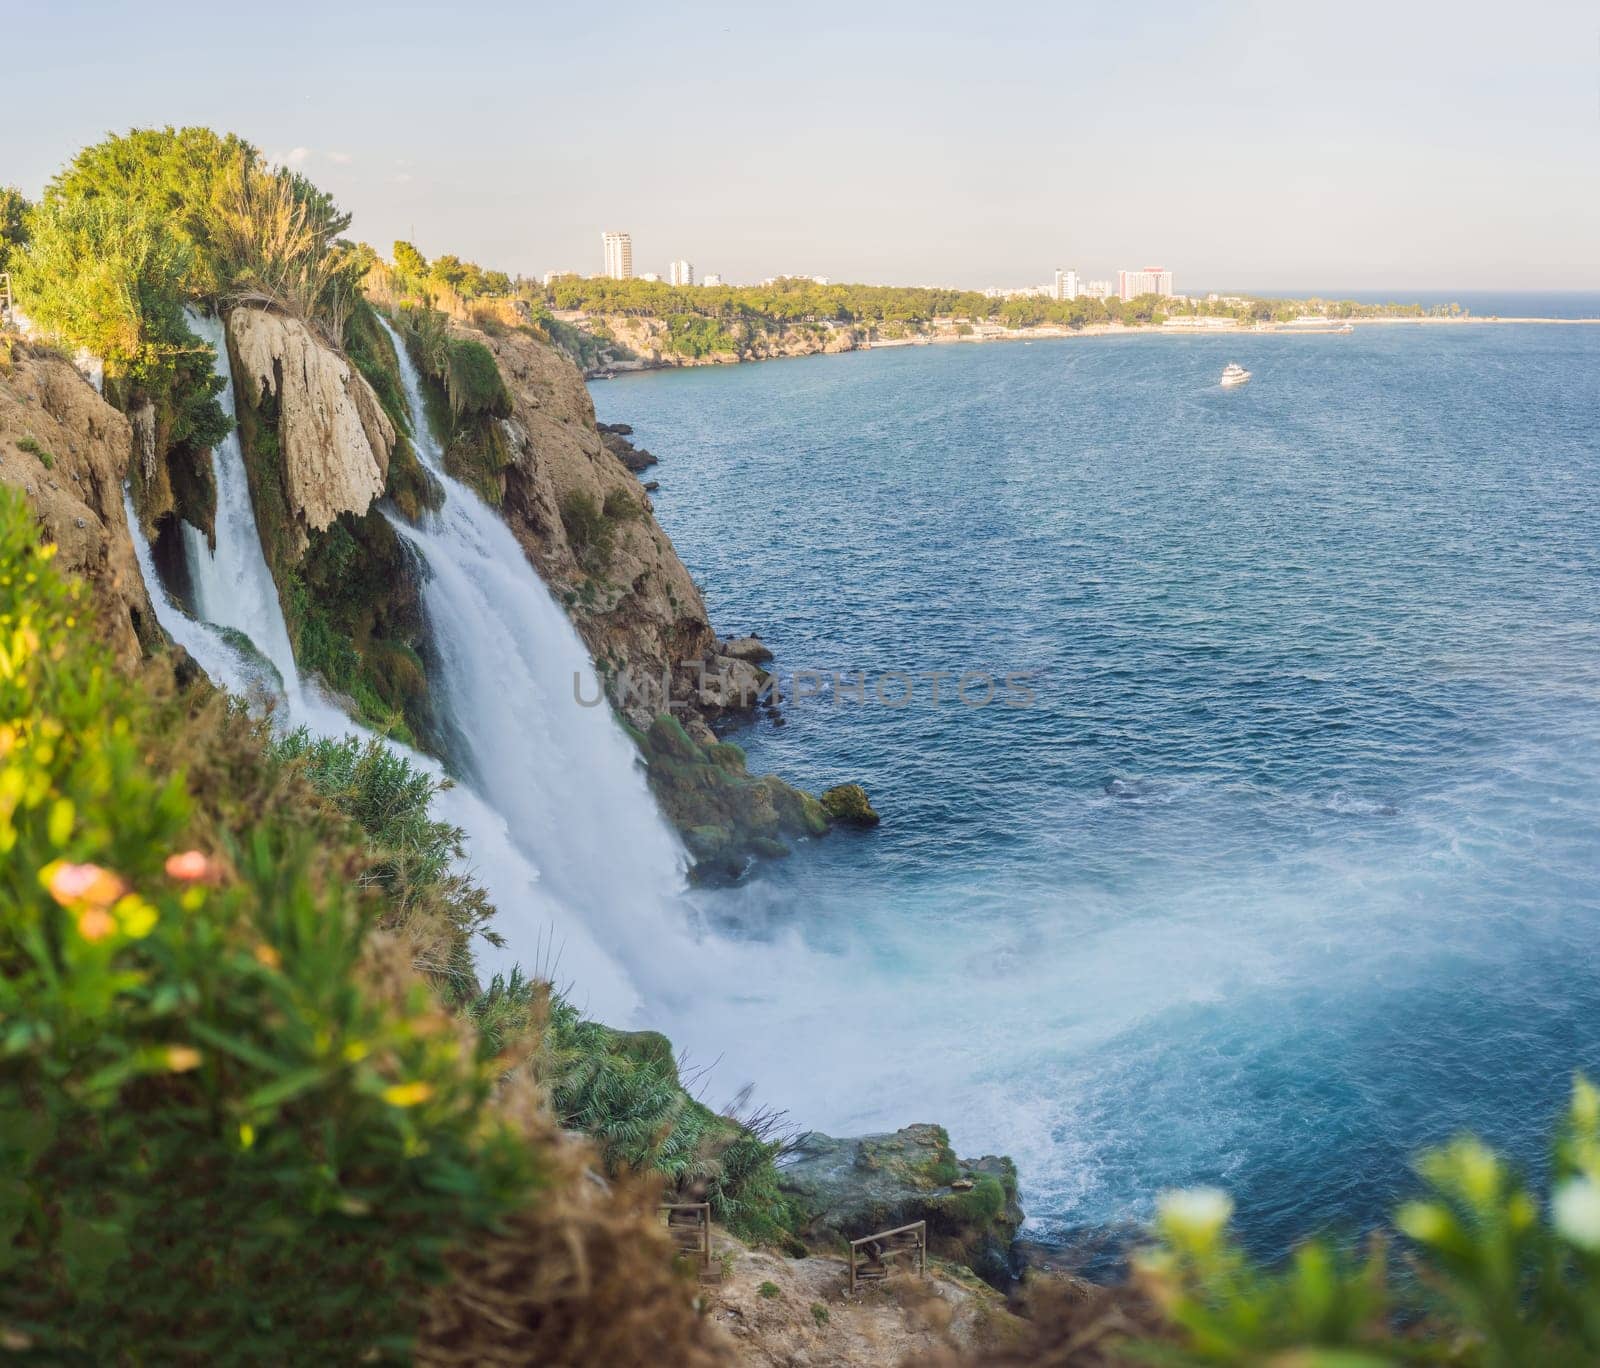 Lower Duden Falls drop off a rocky cliff falling from about 40 m into the Mediterranean Sea in amazing water clouds. Tourism and travel destination photo in Antalya, Turkey. Turkiye